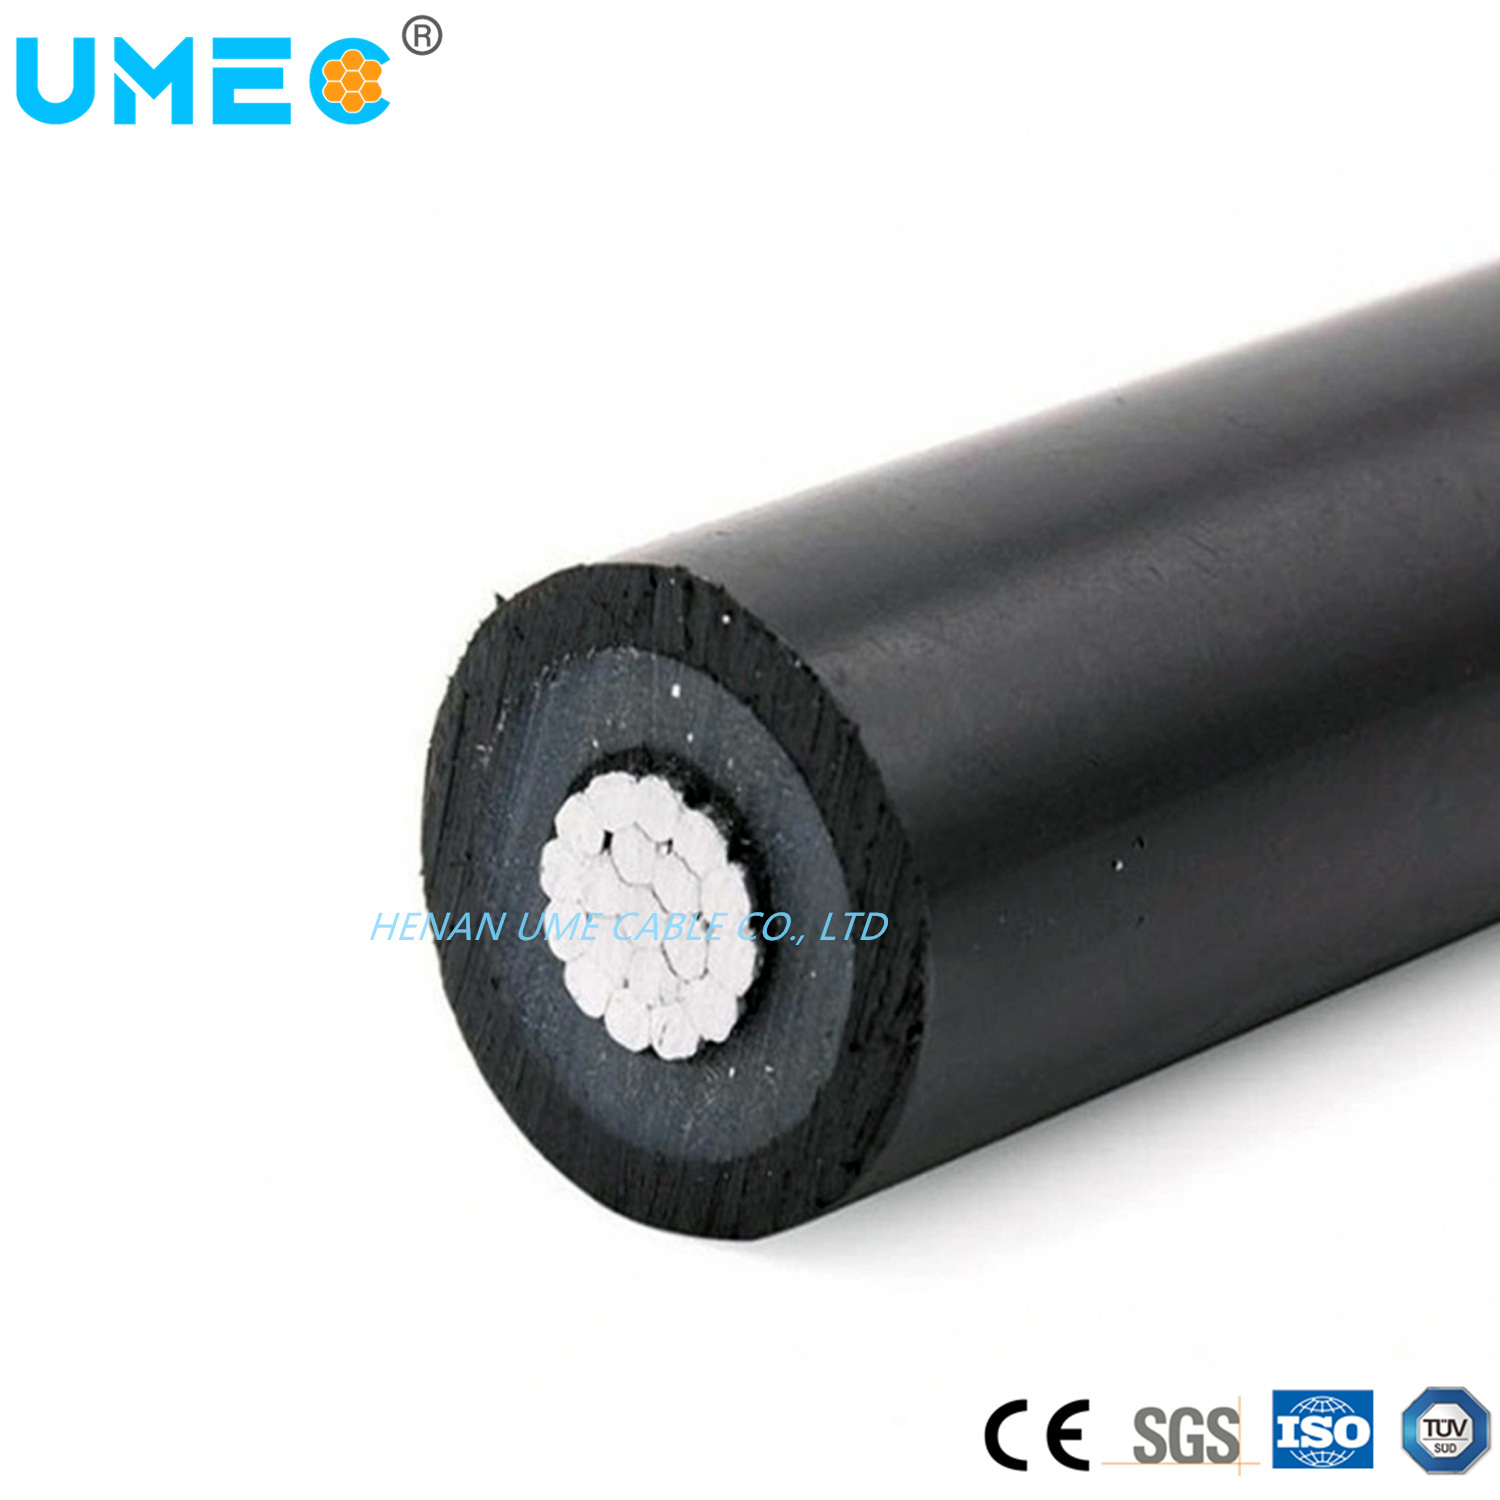 XLPE Insulated Unarmoured PVC Sheath Cable